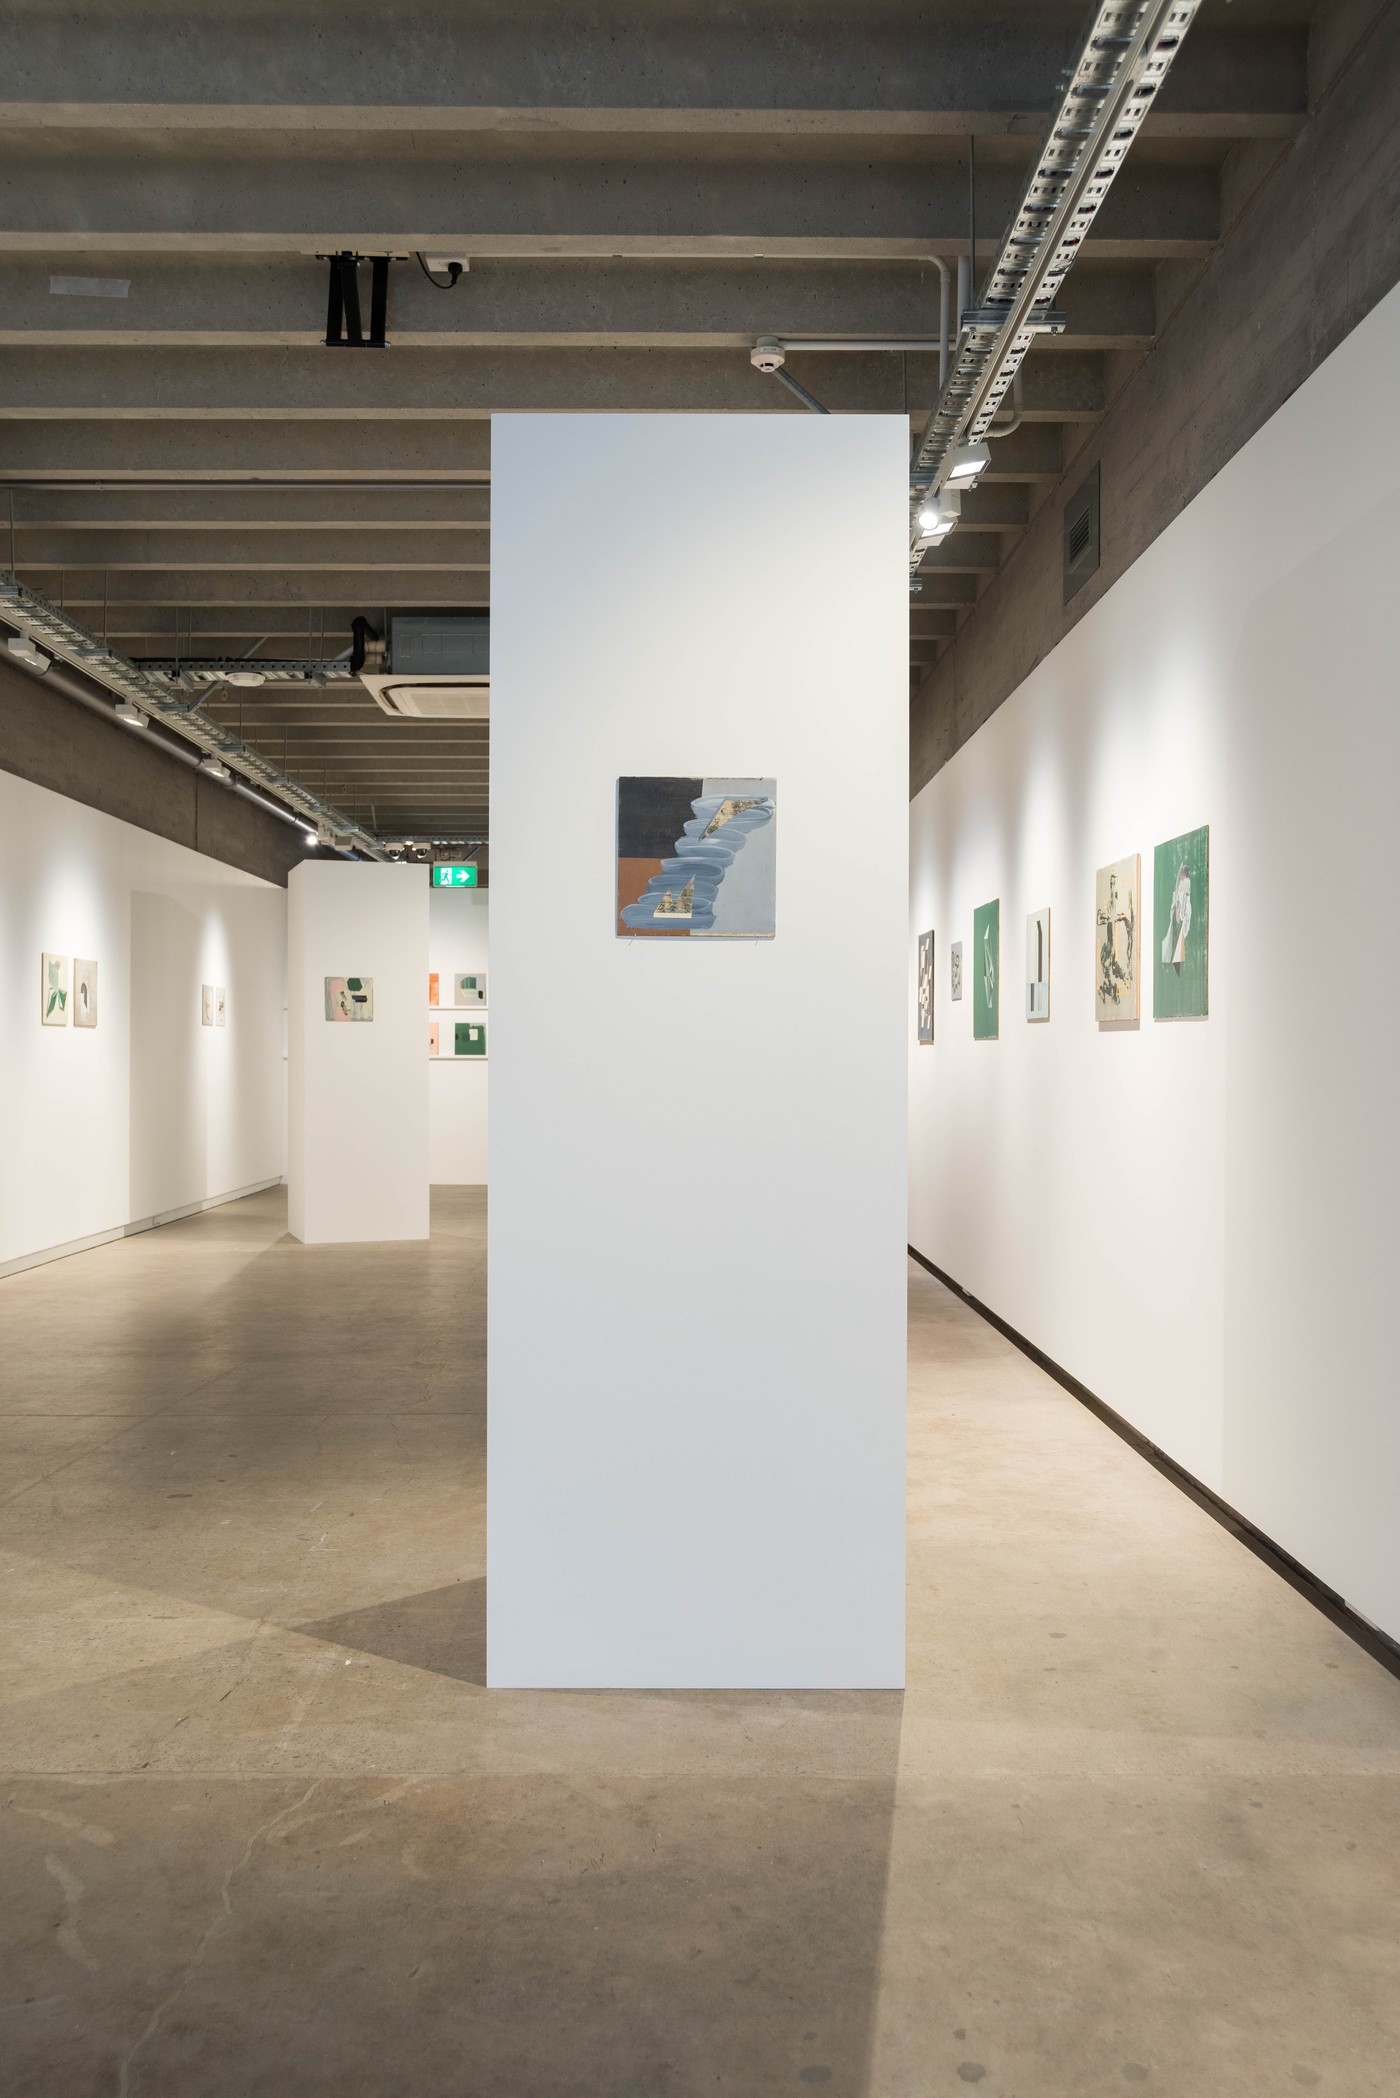 Image: Installation view of Malcolm Terry, SIDEWAYS. CoCA, 2020. Photographer: Mitchell Bright.